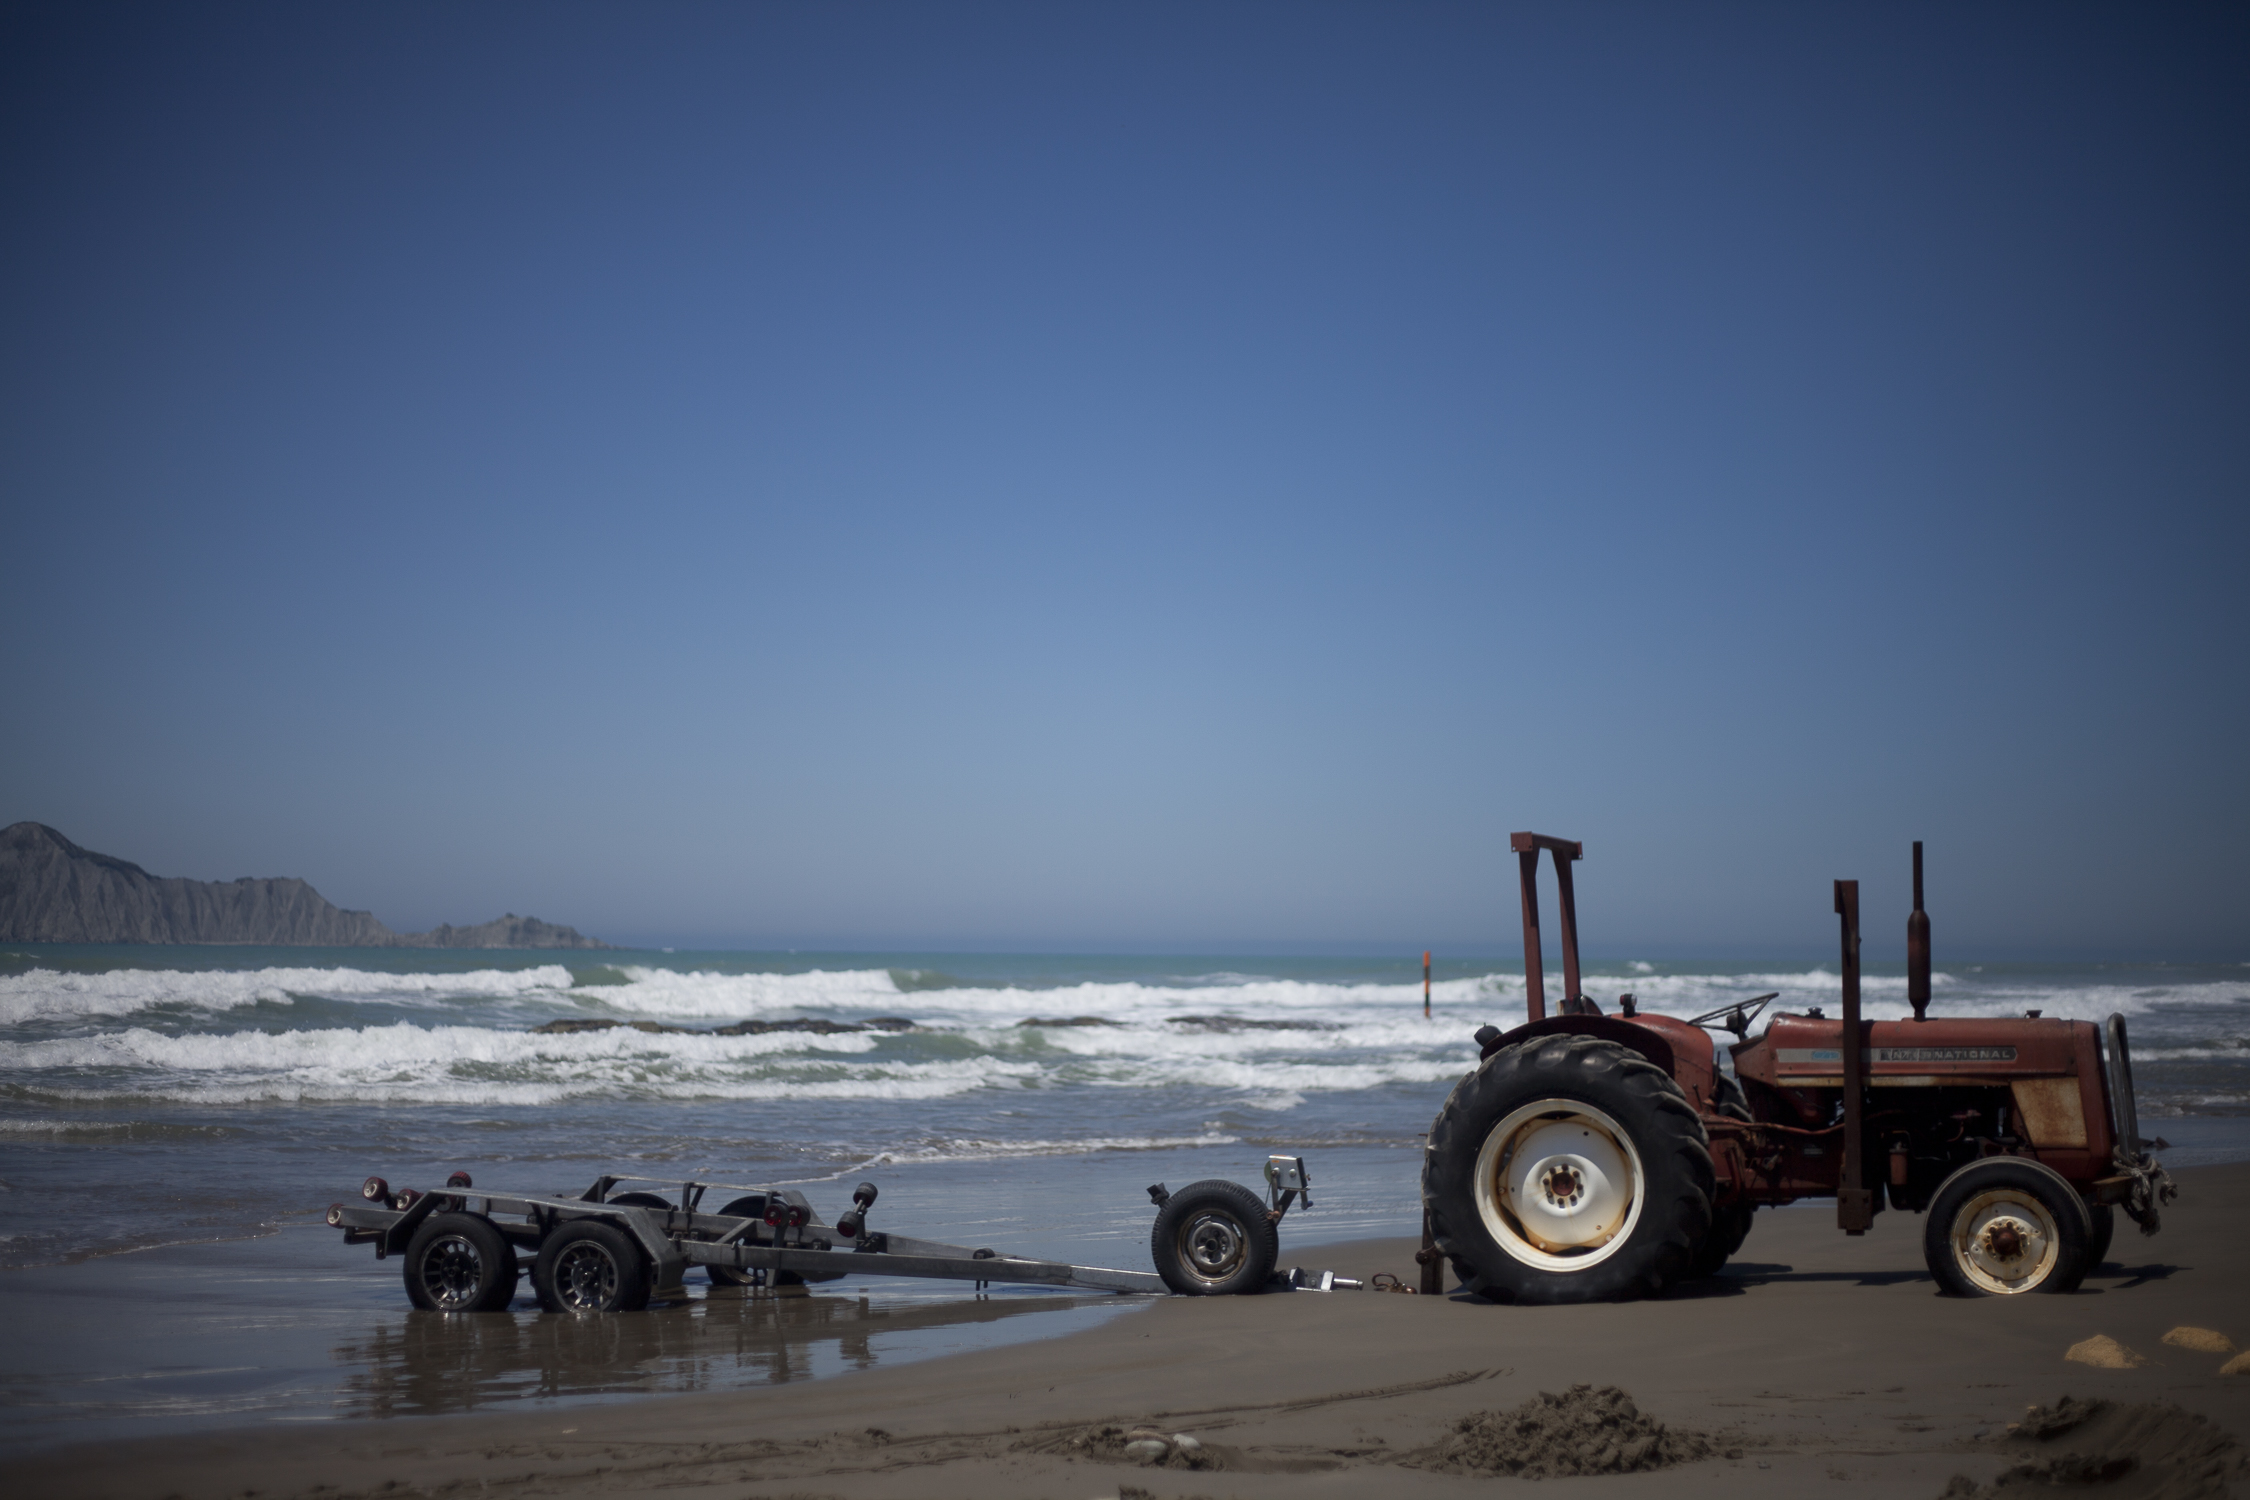 A tractor and trailer parked on Waimarama Beach, New Zealand - photo, copyright, leonie wise